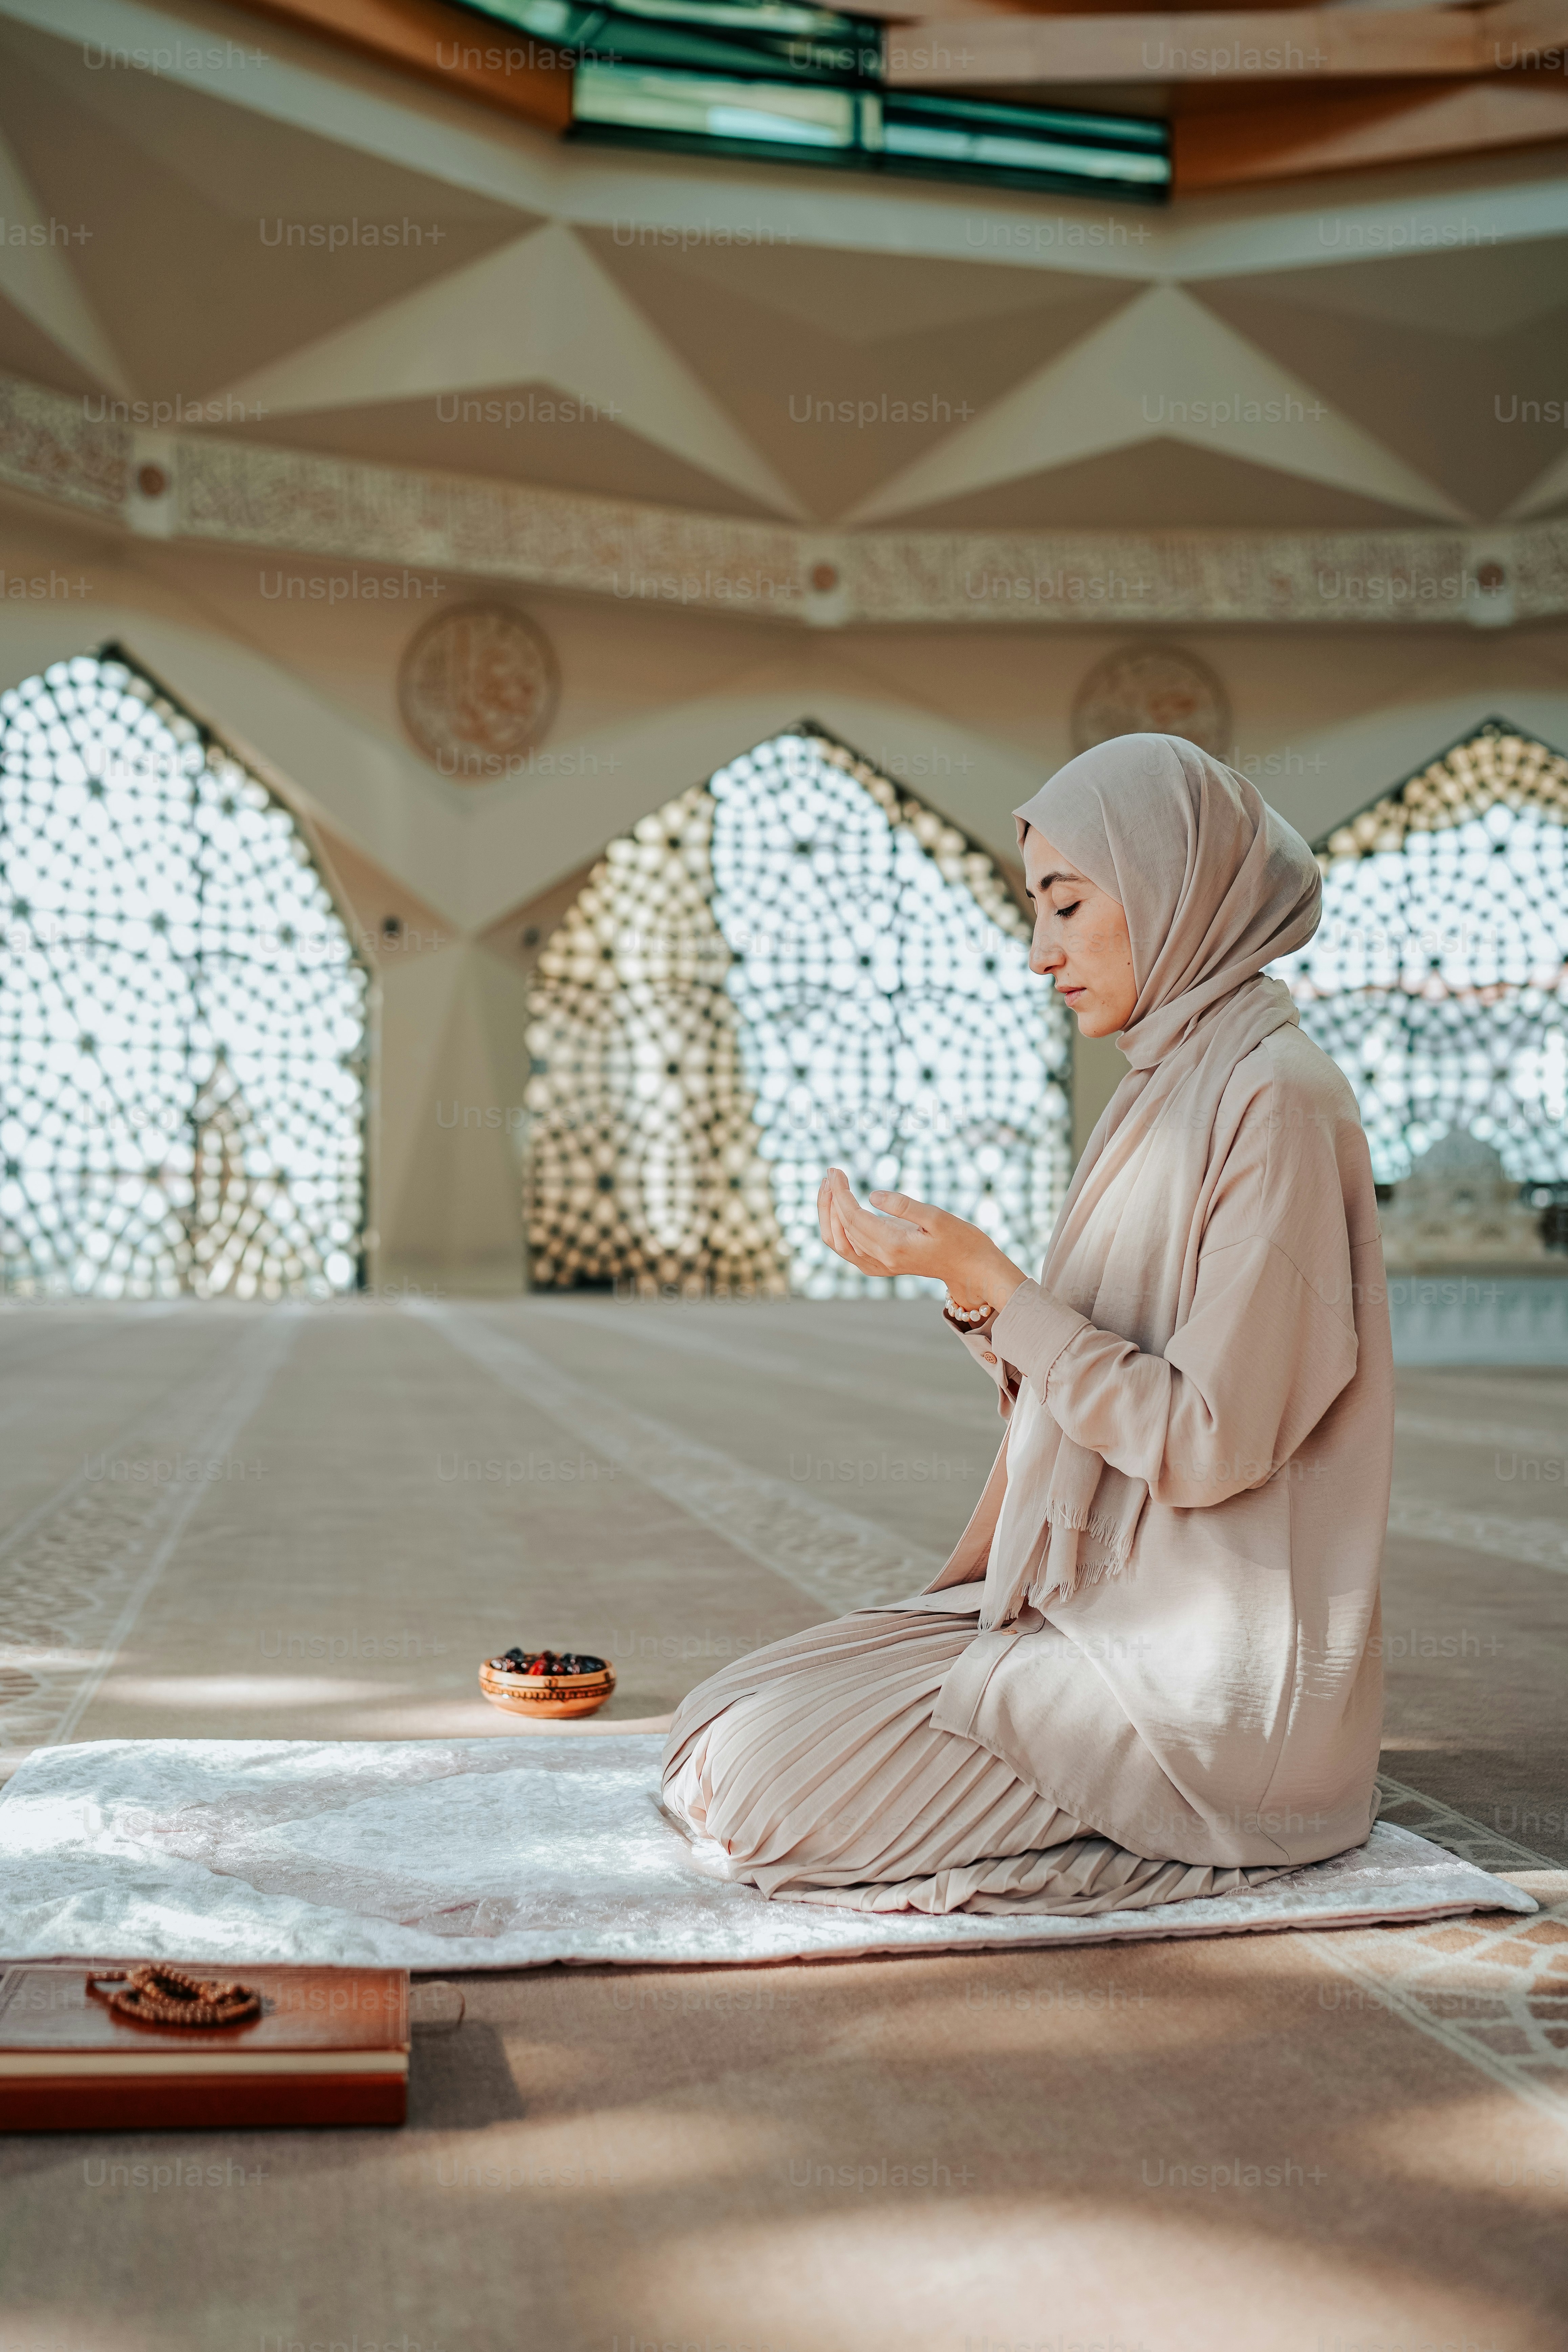 750+ Muslim Woman Pictures Download Free Images and Stock Photos on Unsplash